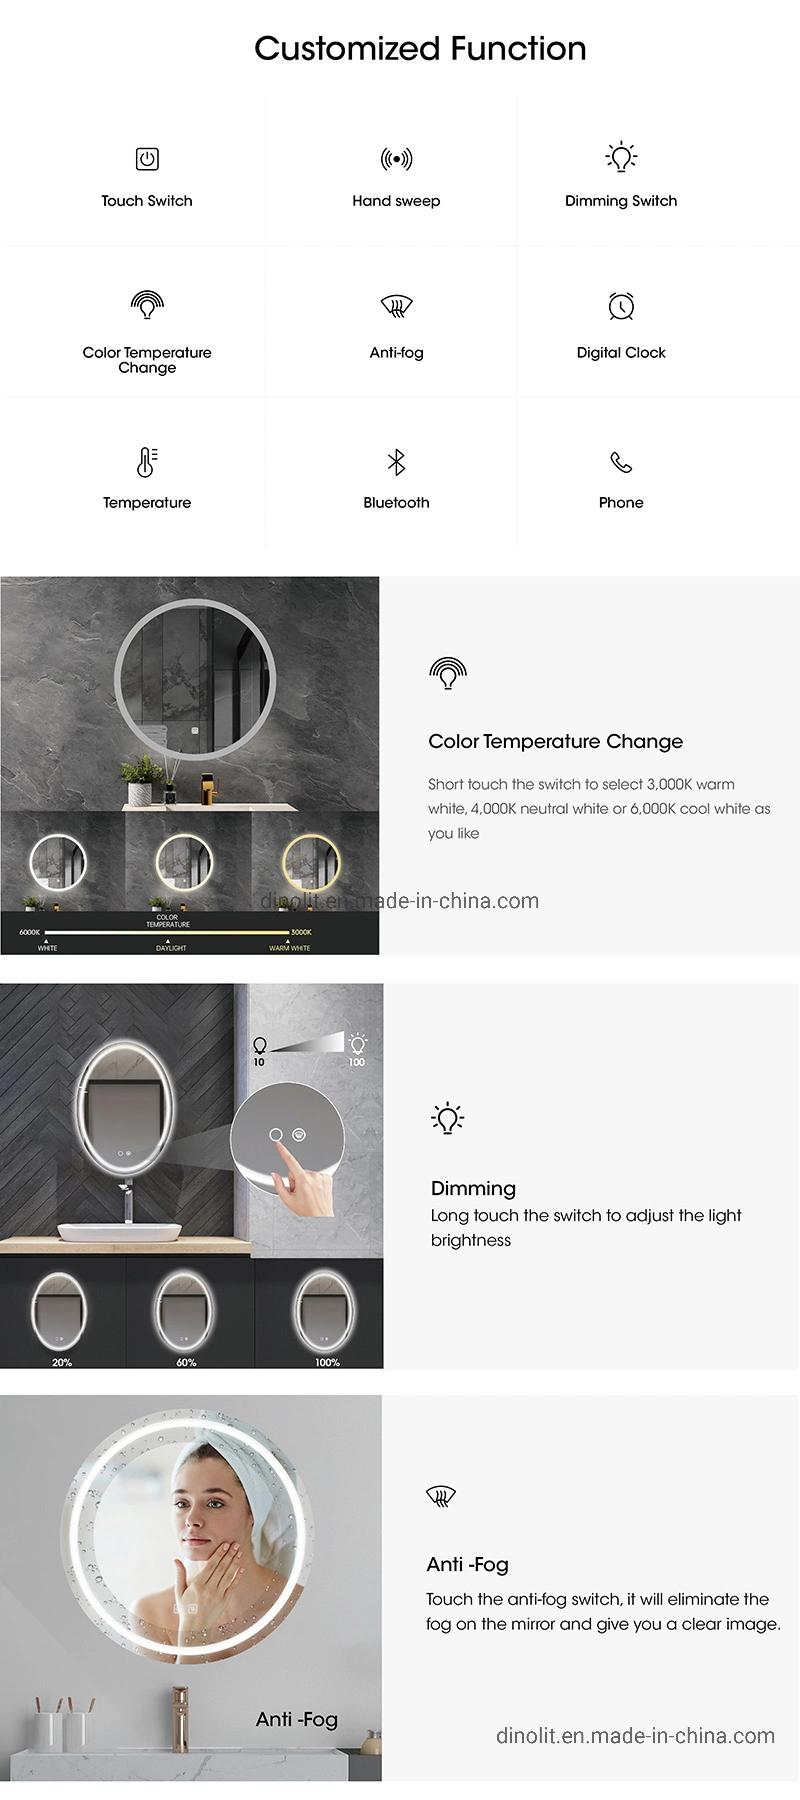 Customized Illuminated Waterproofed LED Bathroom Wall Mounted Glass Light Mirror with Touch Screen Switch CE RoHS IP44 (touch on/off, dimmer, bluetooth)